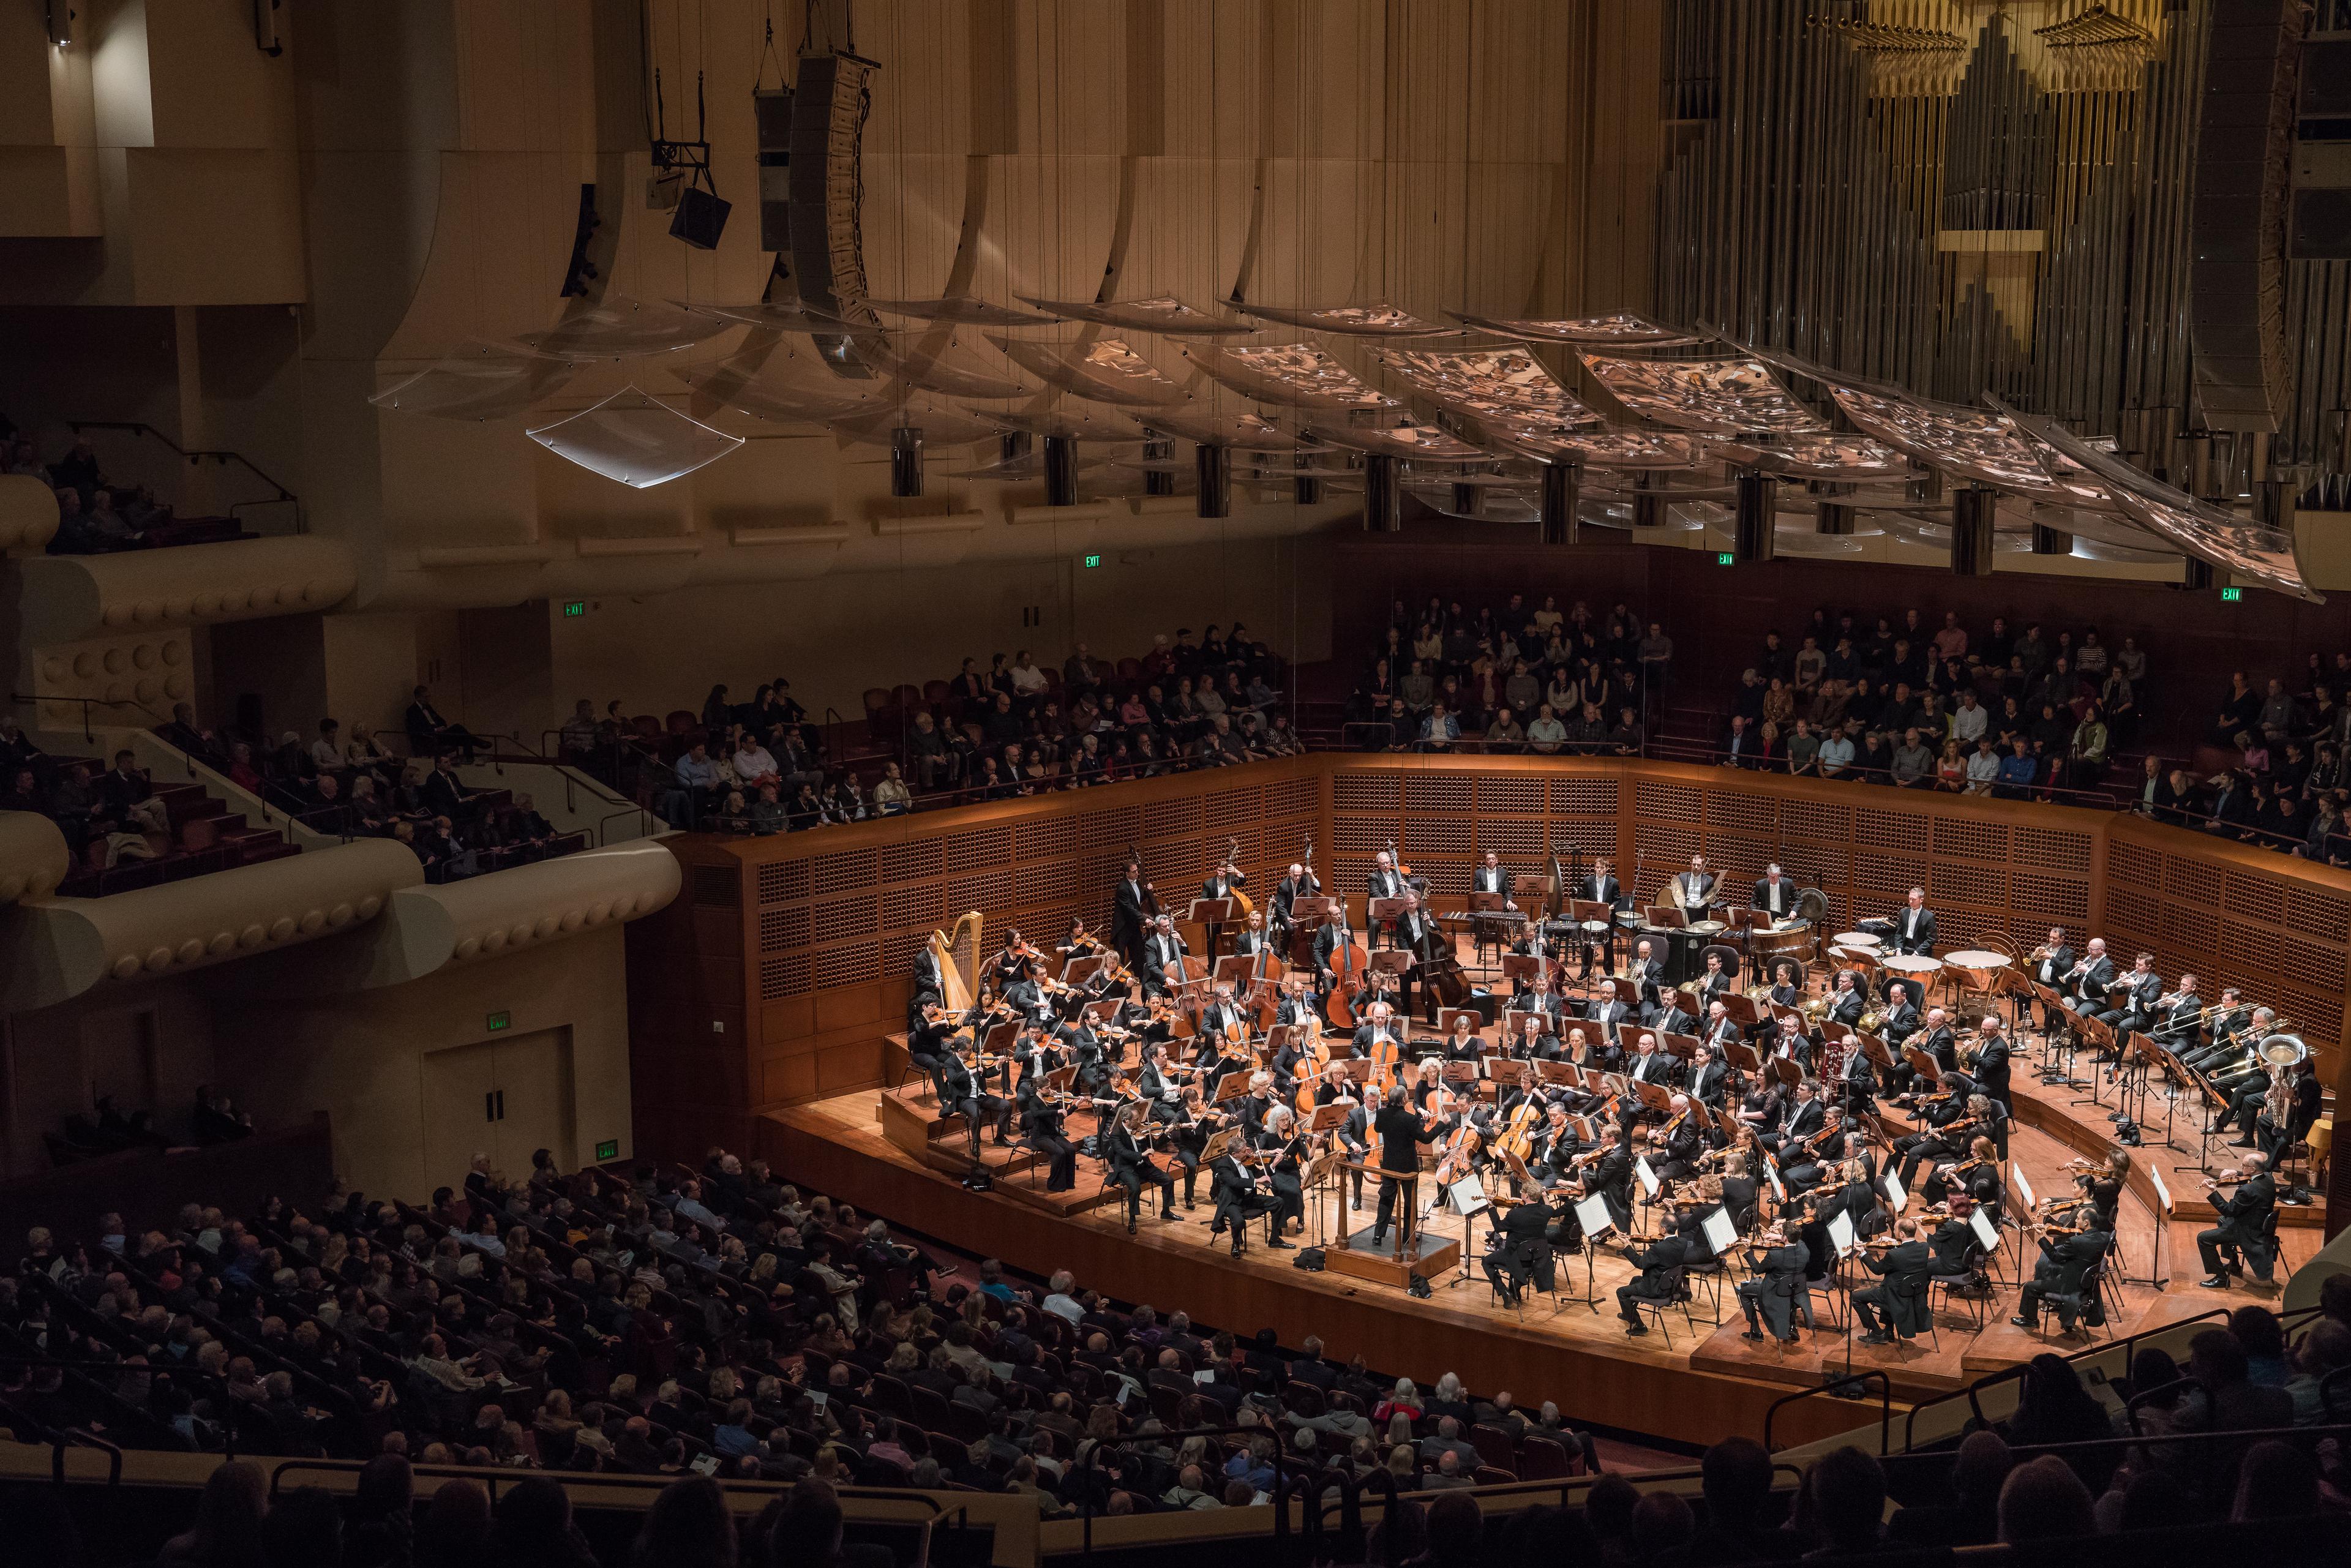 San Francisco Symphony full orchestra on stage